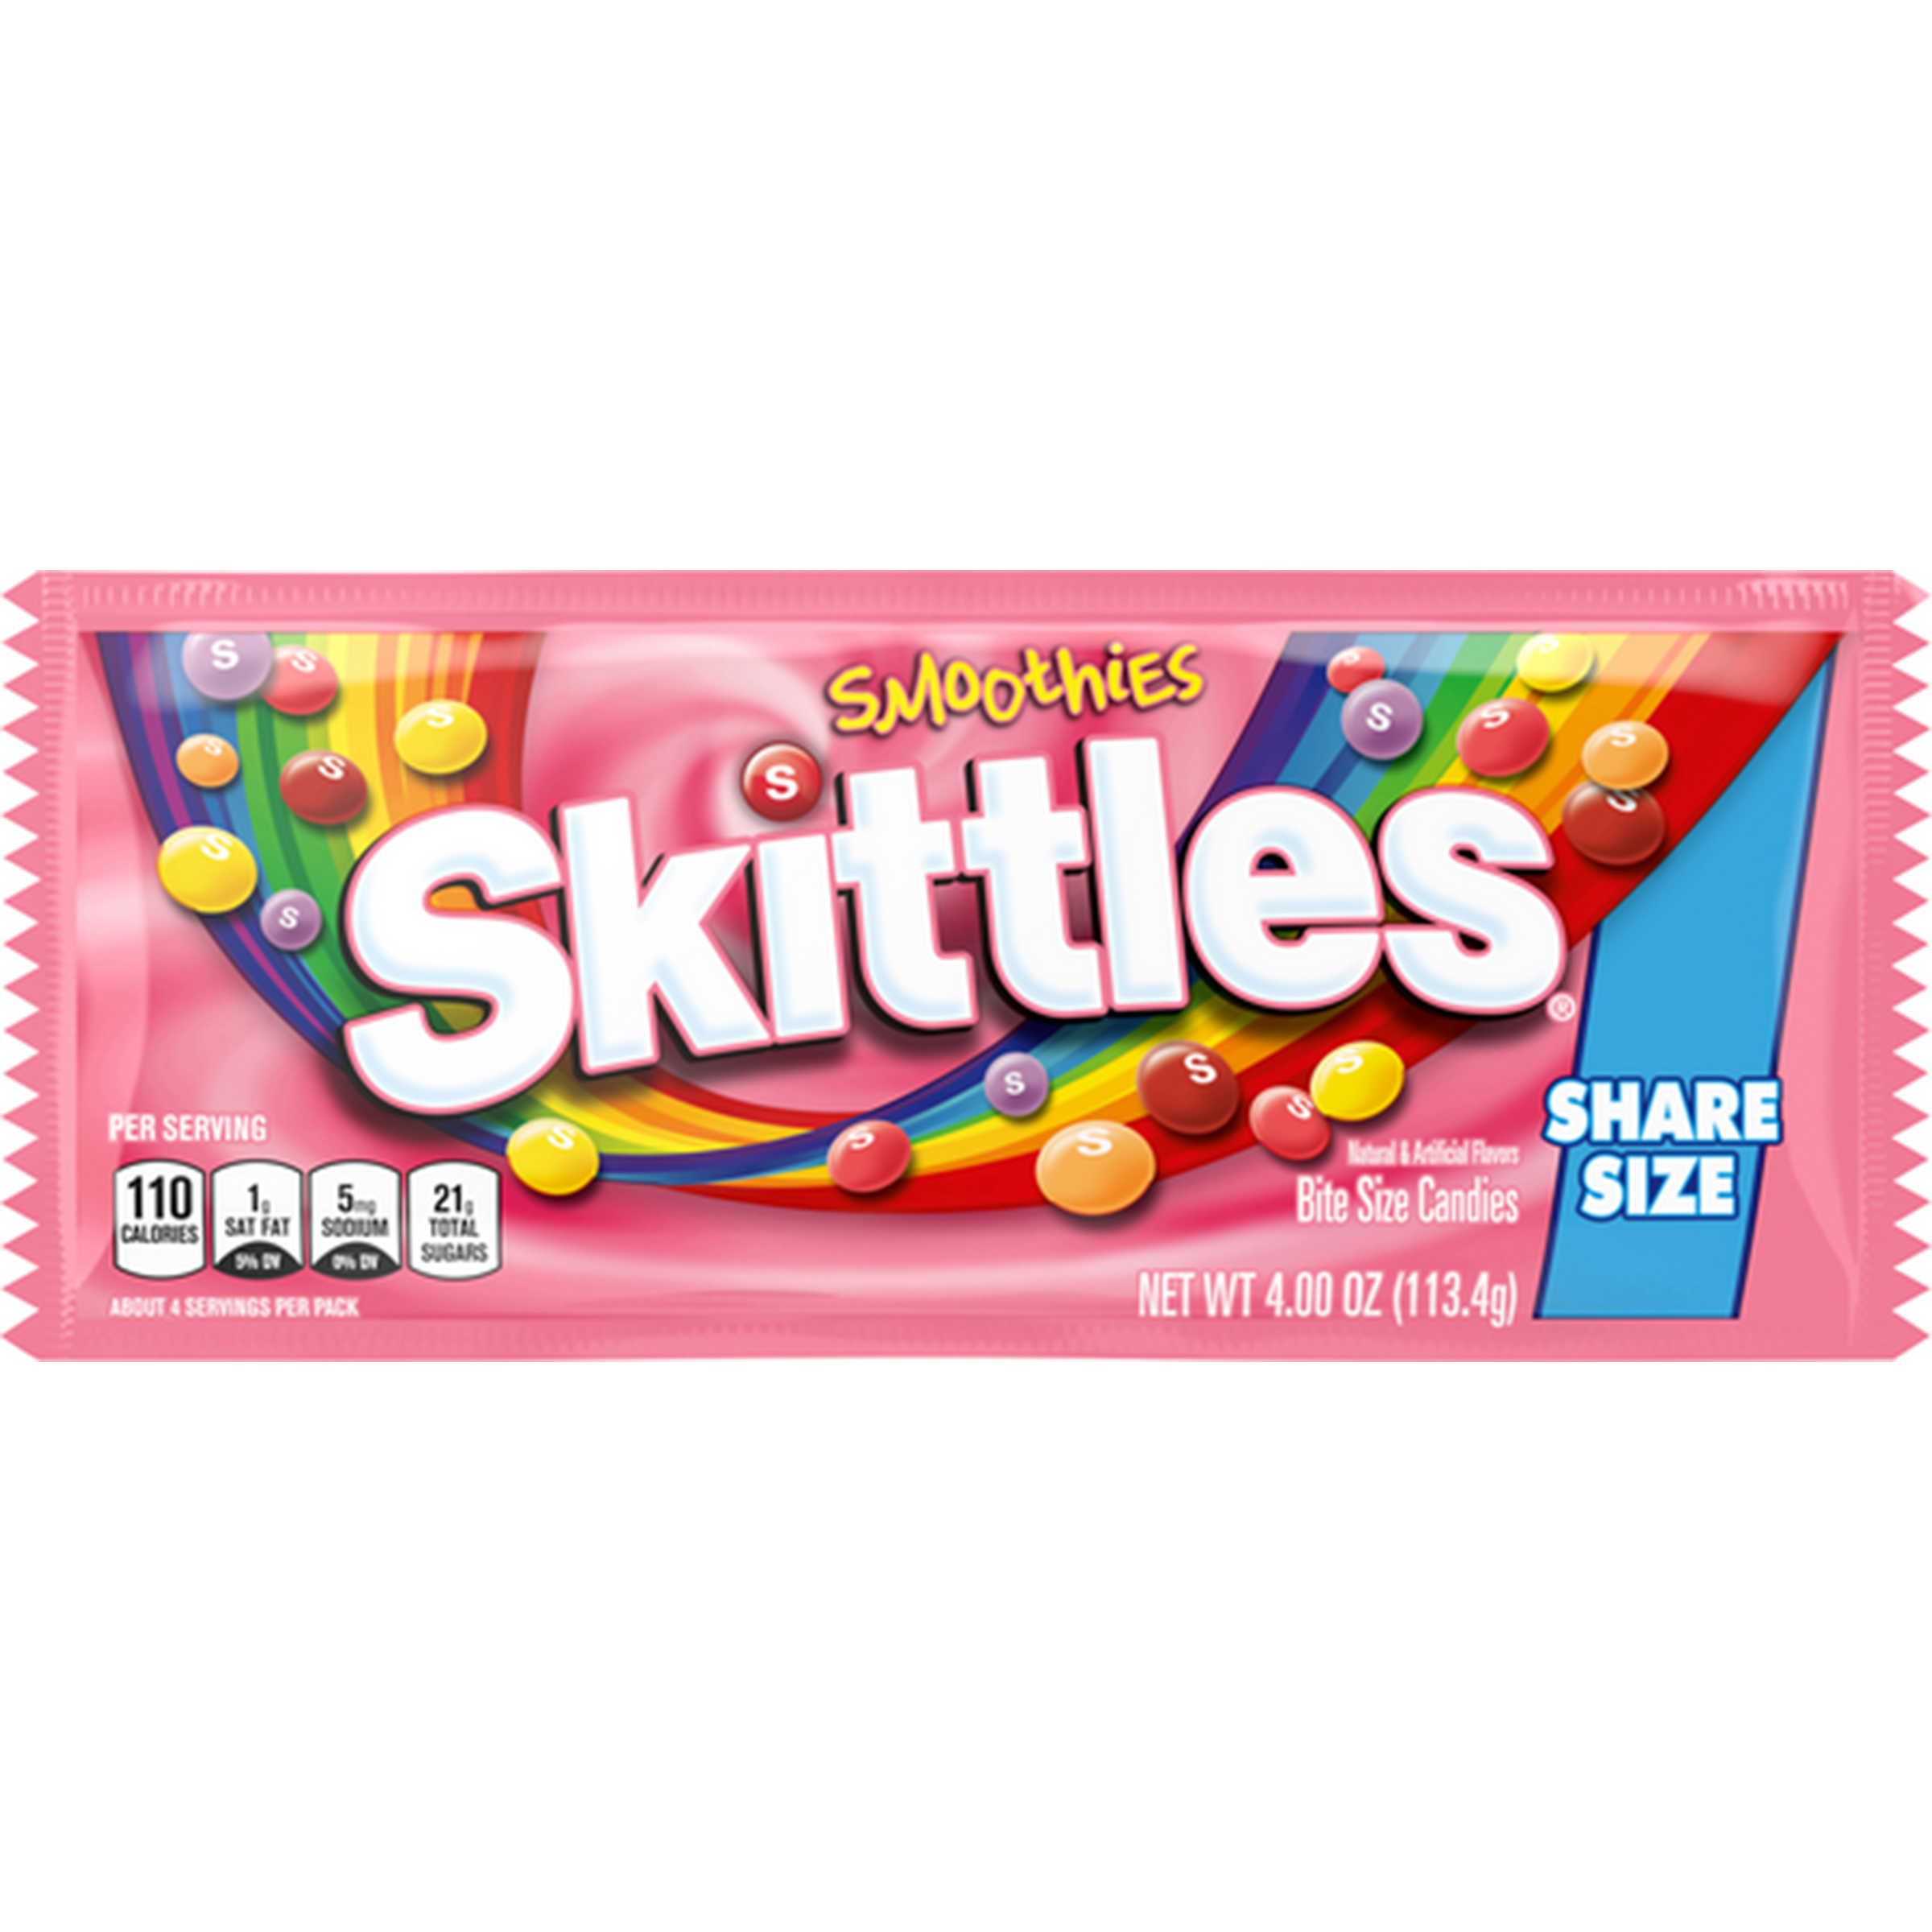 Skittles - Smoothies (Share Size)